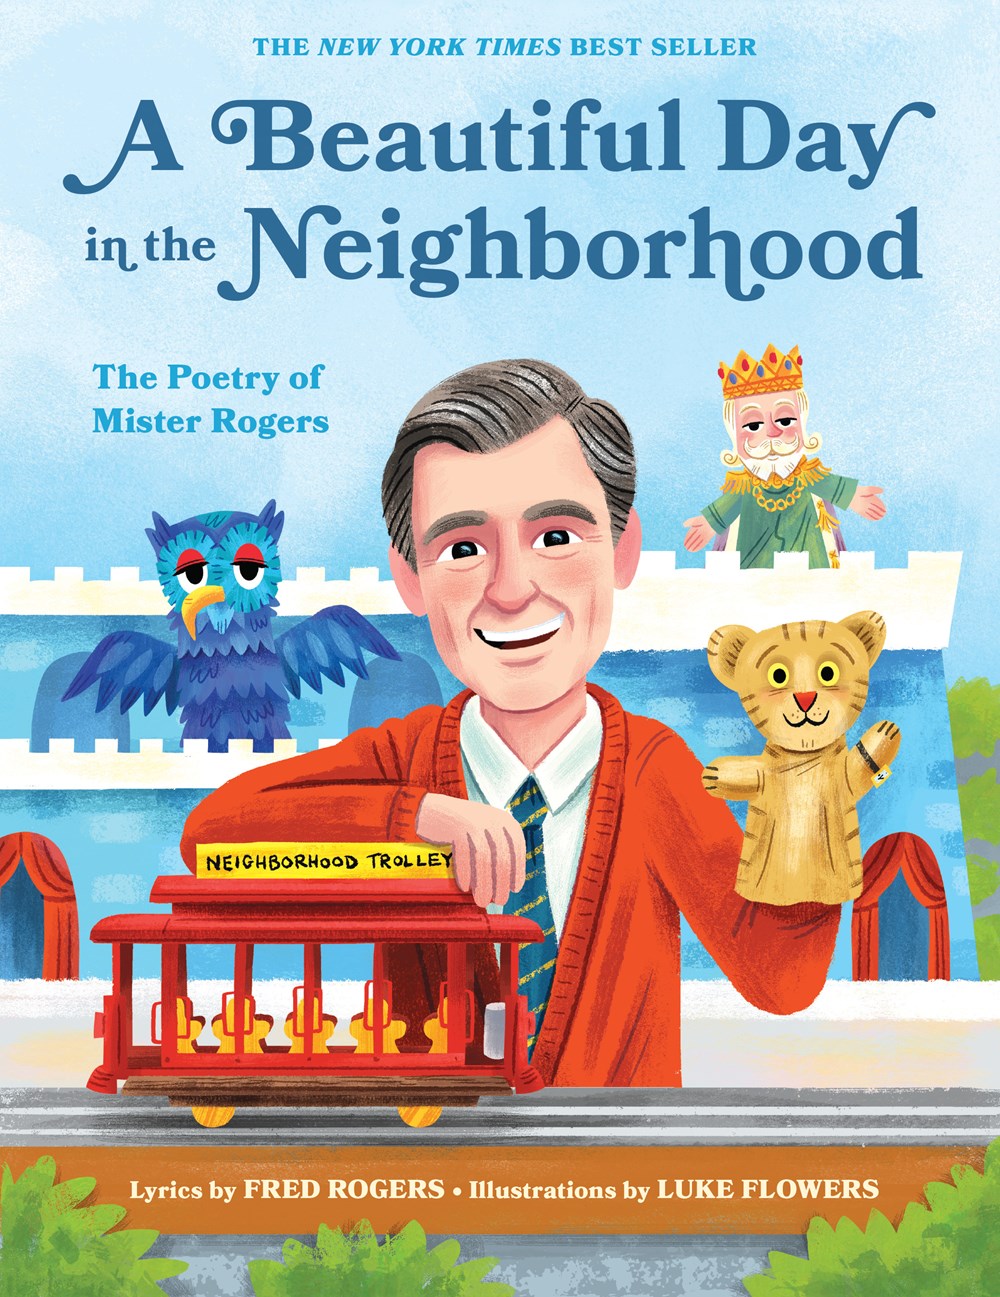 A Beautiful Day in the Neighborhood: The Poetry of Mister Rogers, Lyrics by Fred Rogers, Illustrated by Luke Flowers